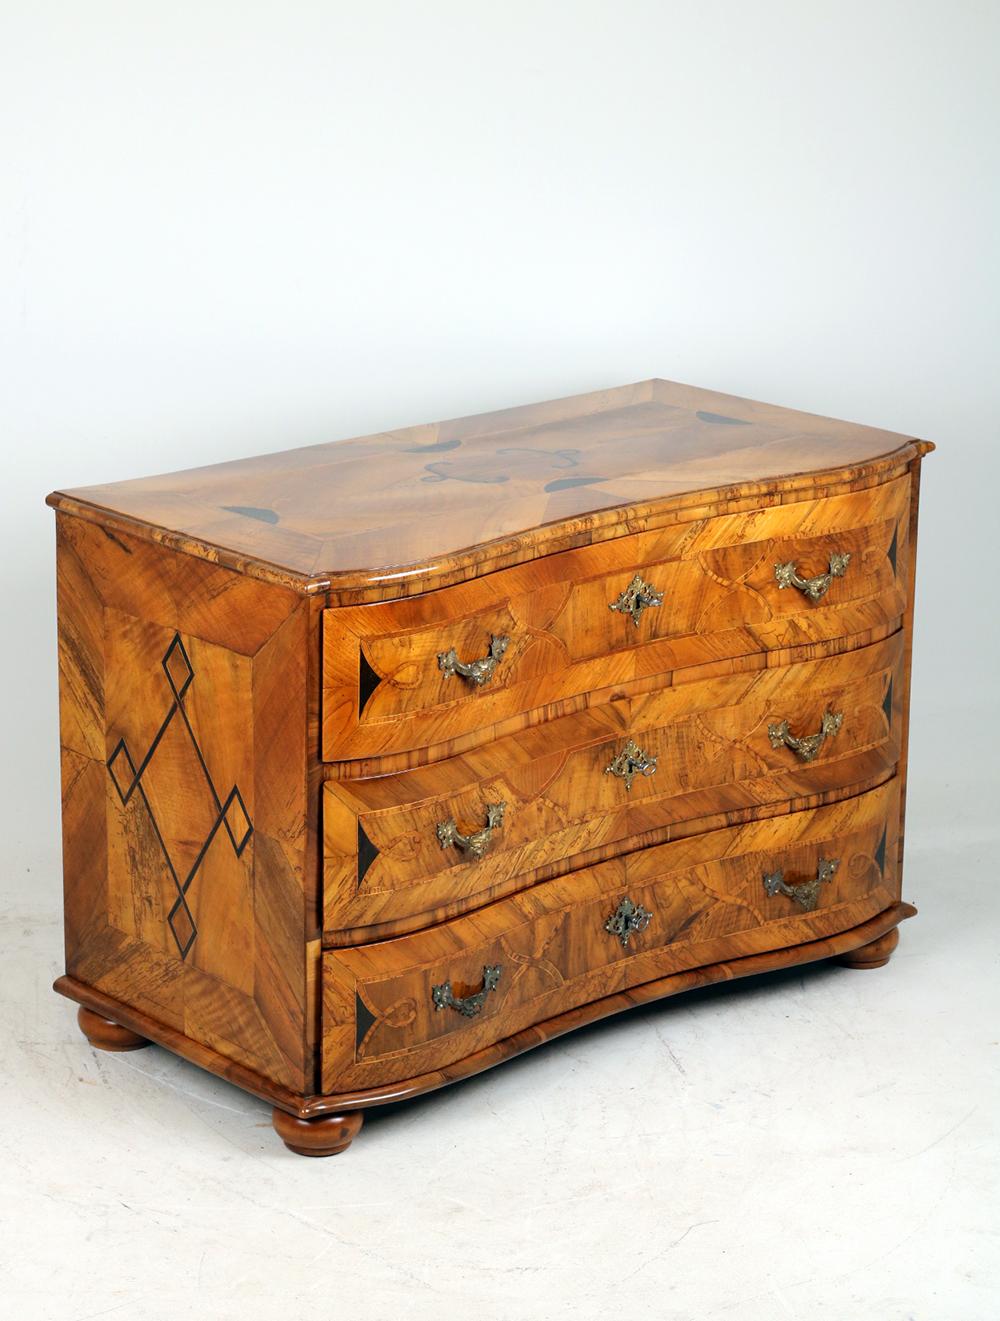 Polished 18th Century Baroque Chest of Drawers